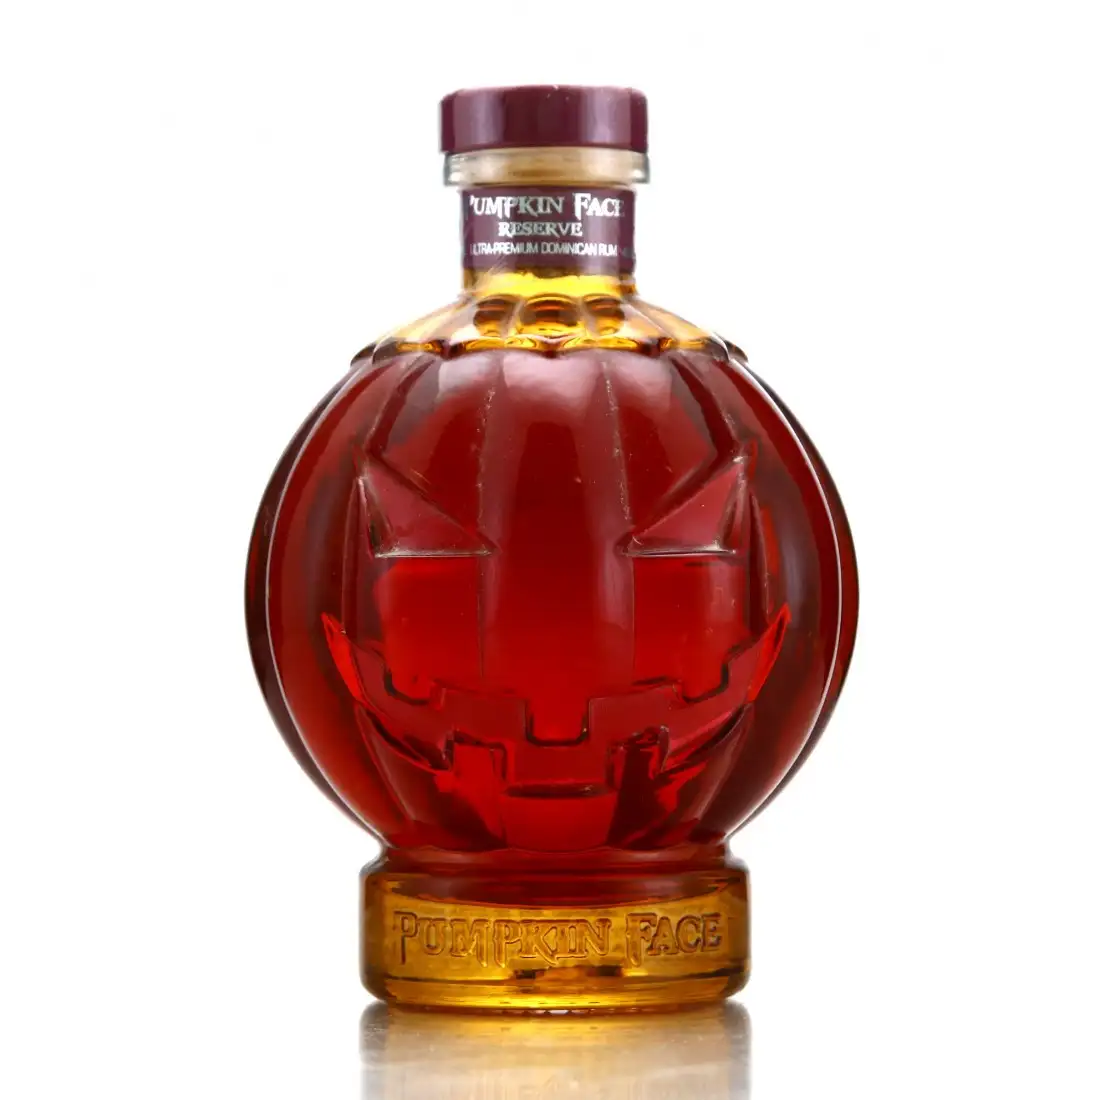 Image of the front of the bottle of the rum Pumpkin Face Ultra Premium Reserve